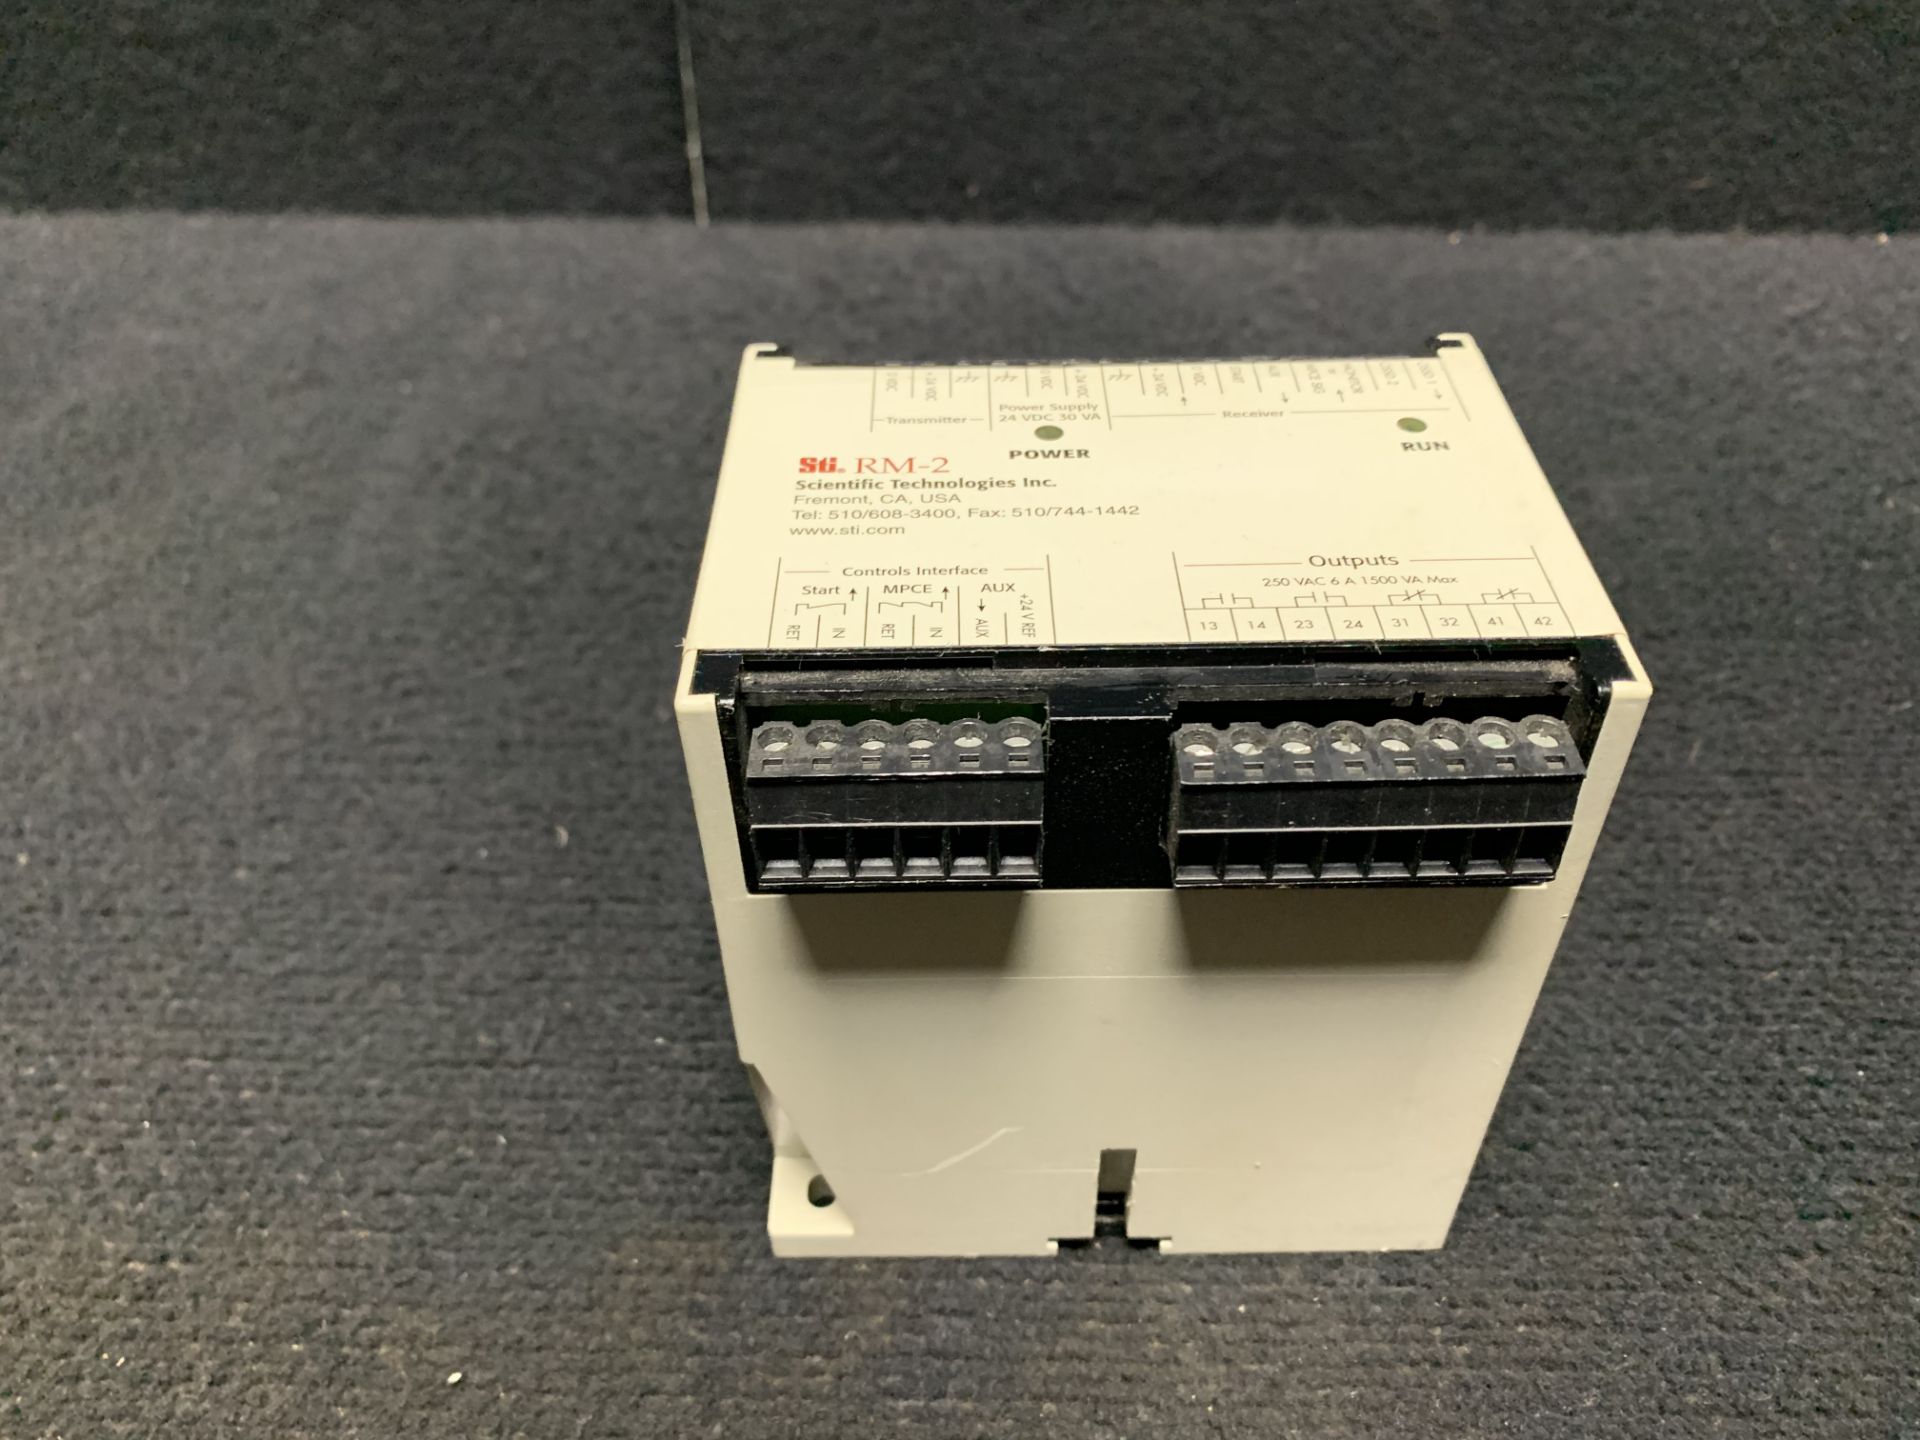 OMRON STI DIN MOUNT RM-2 MODEL 437760010 RELAY MODULE IP20 PROTECTION 2 N.O 2 N.C 6A 250 VAC 24V - Image 3 of 5